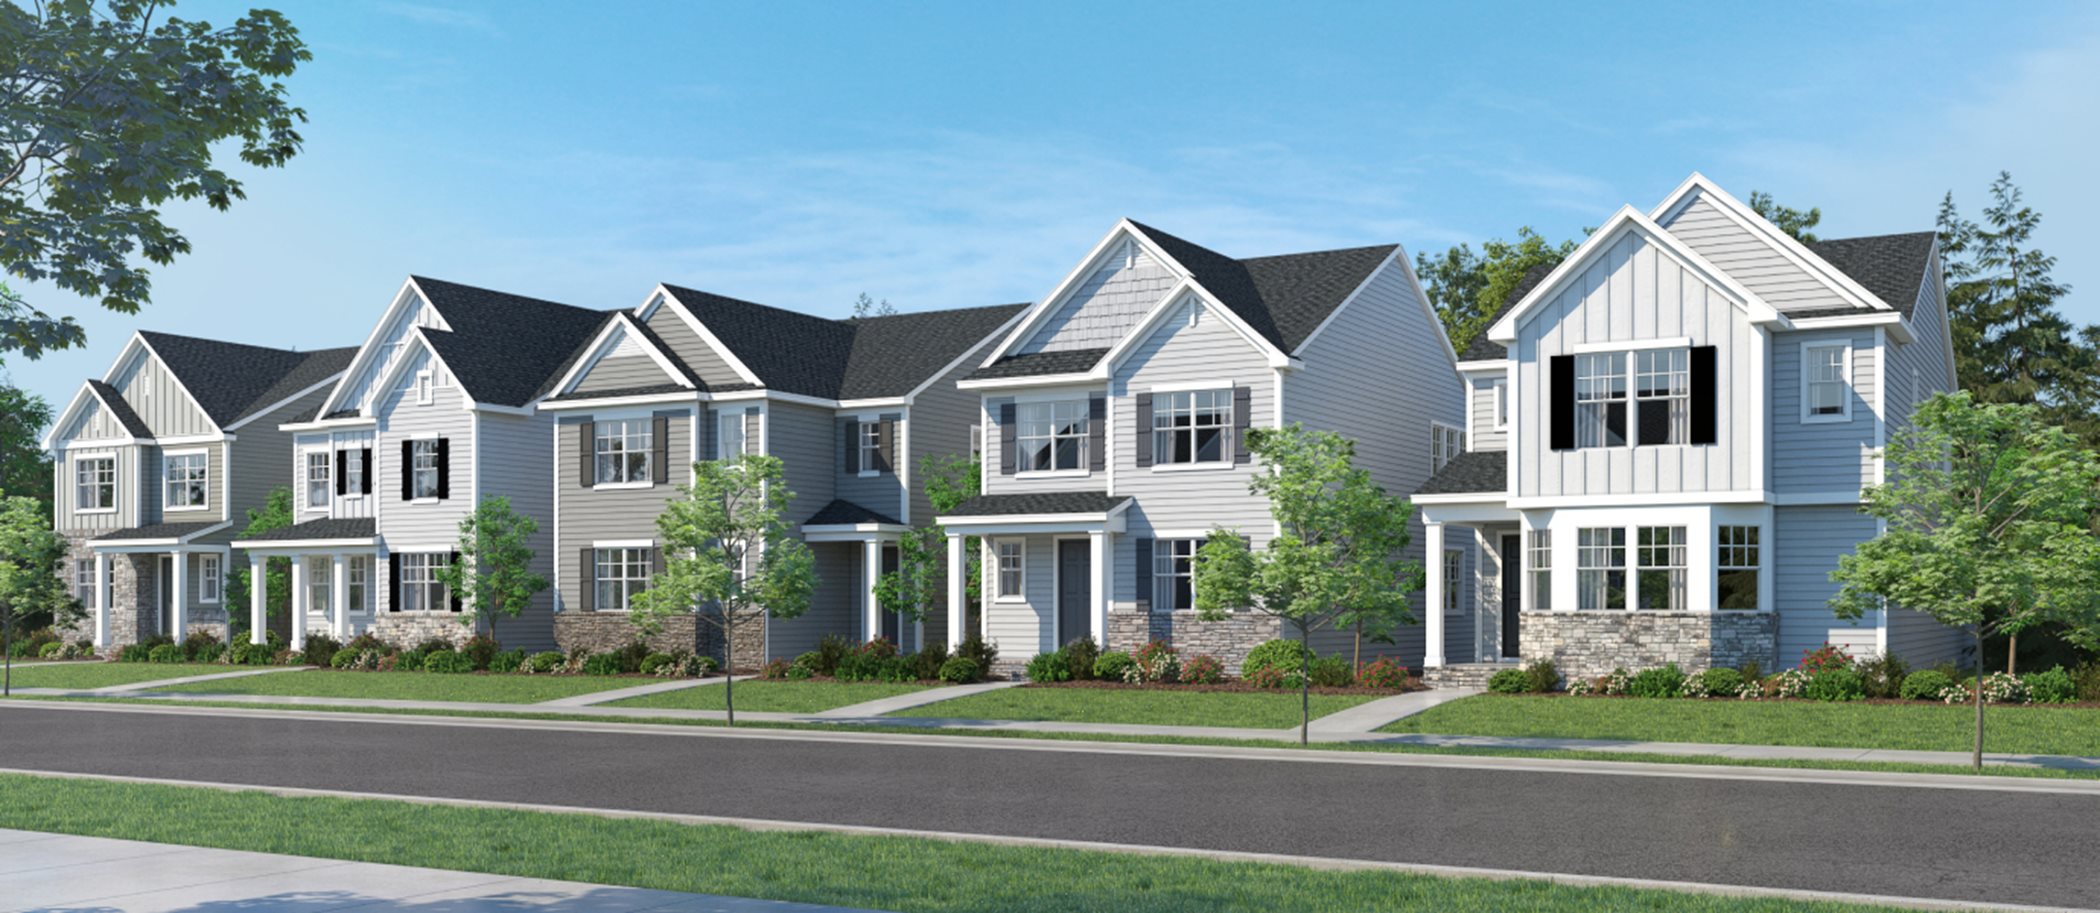 Streetscape for Cottage II at Smith Farm